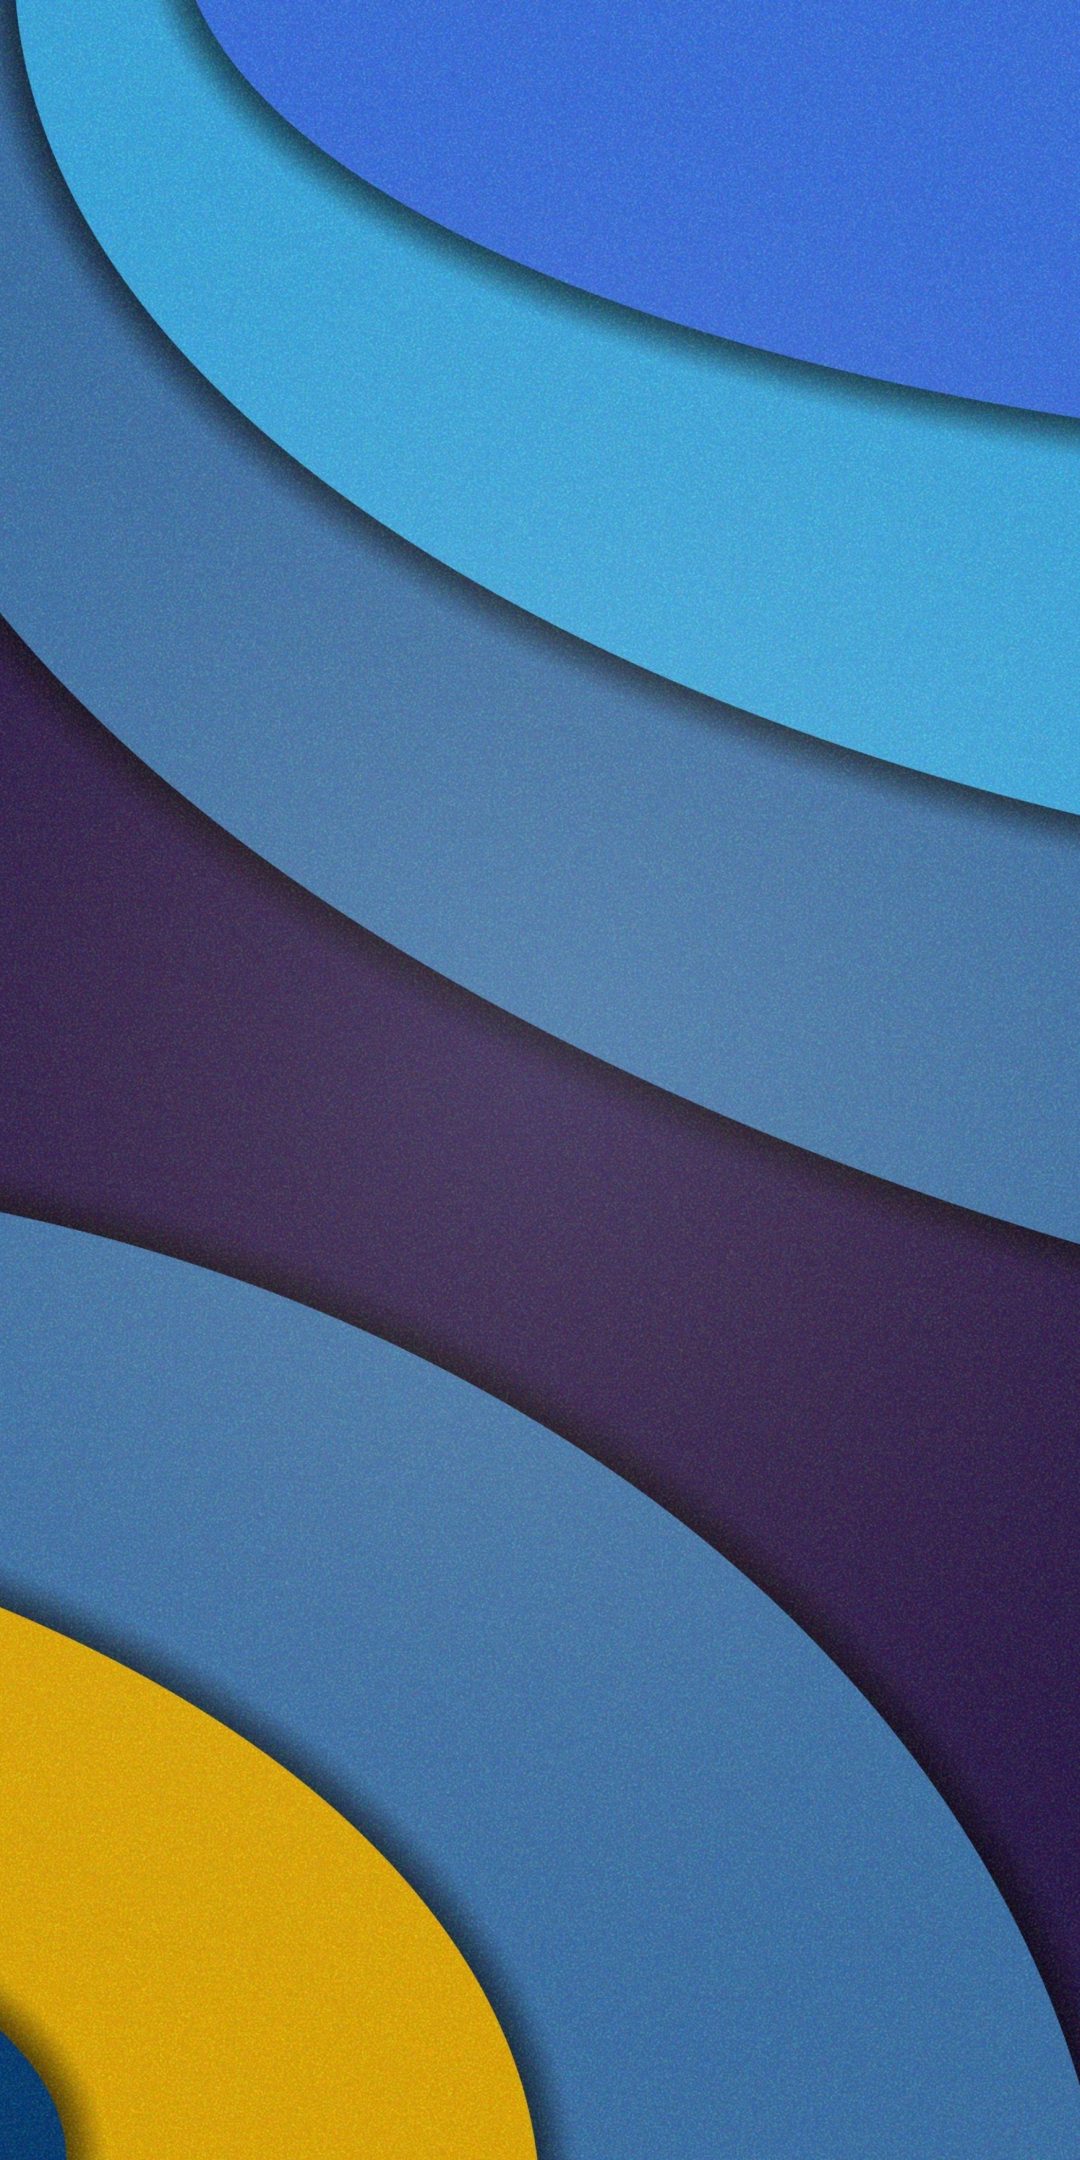 Material design, curves, abstract, 1080x2160 wallpaper